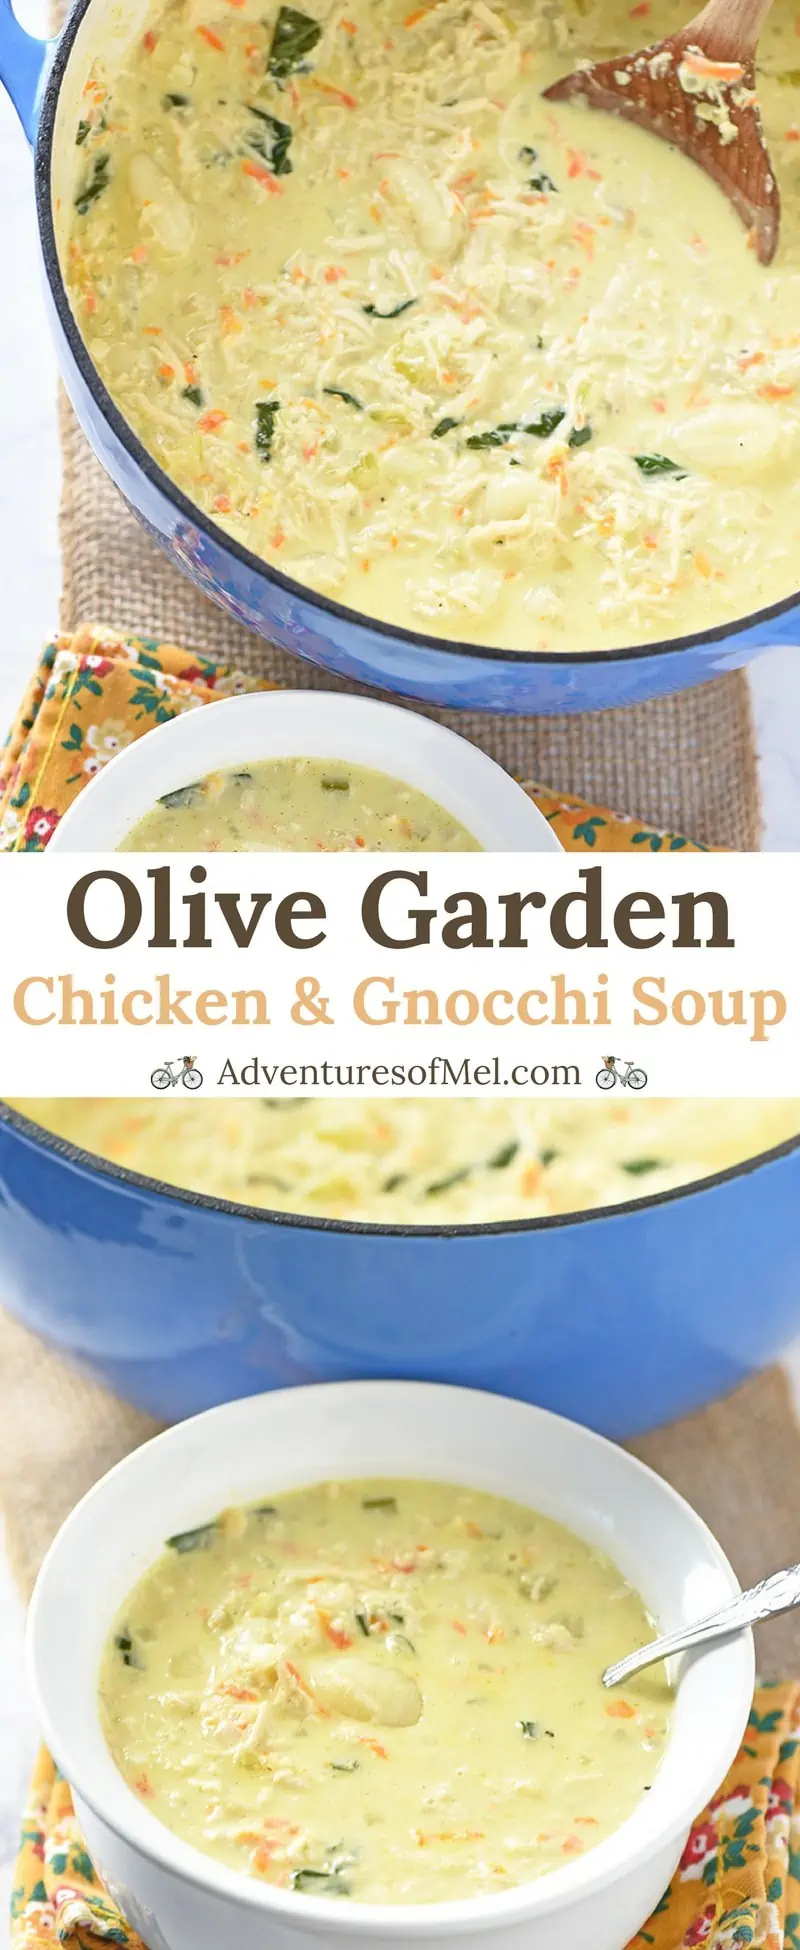 Olive Garden Chicken and Gnocchi Soup with chicken, spinach, and gnocchi. Easy copycat of the creamy restaurant soup, it makes a delicious lunch or dinner!